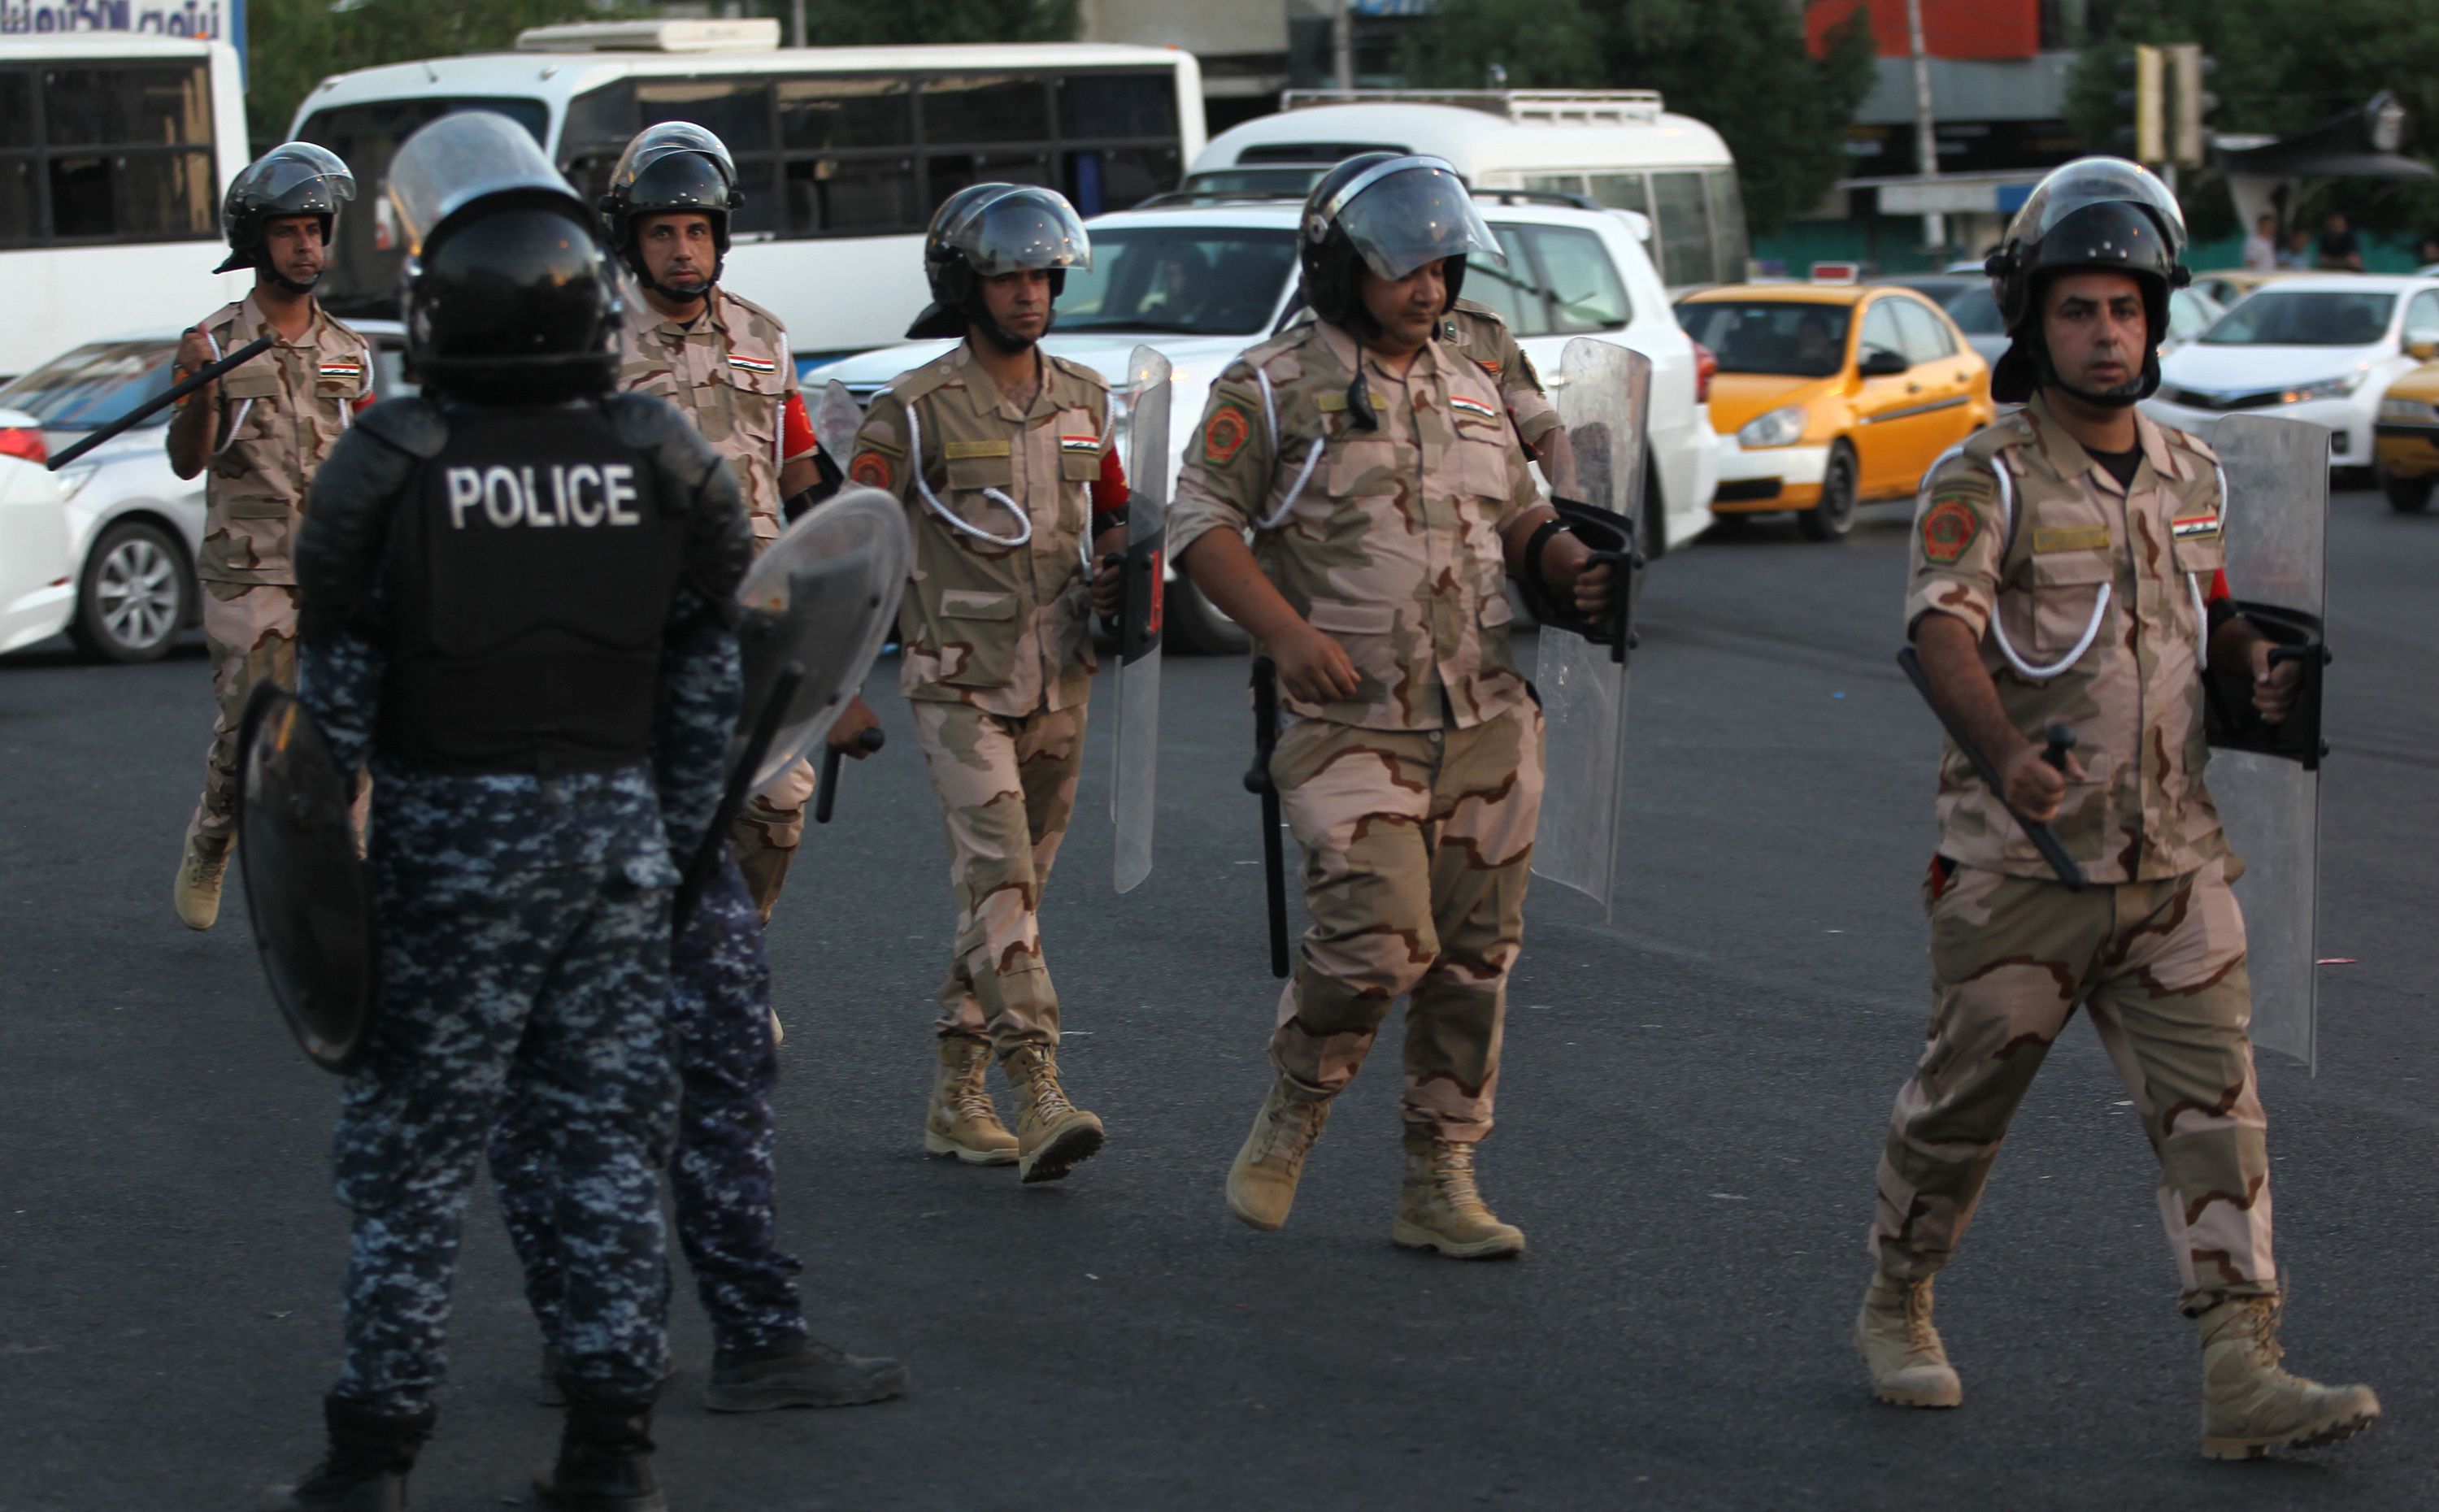 The authorities announce an officer and a security officer injured in a bomb attack in Baghdad